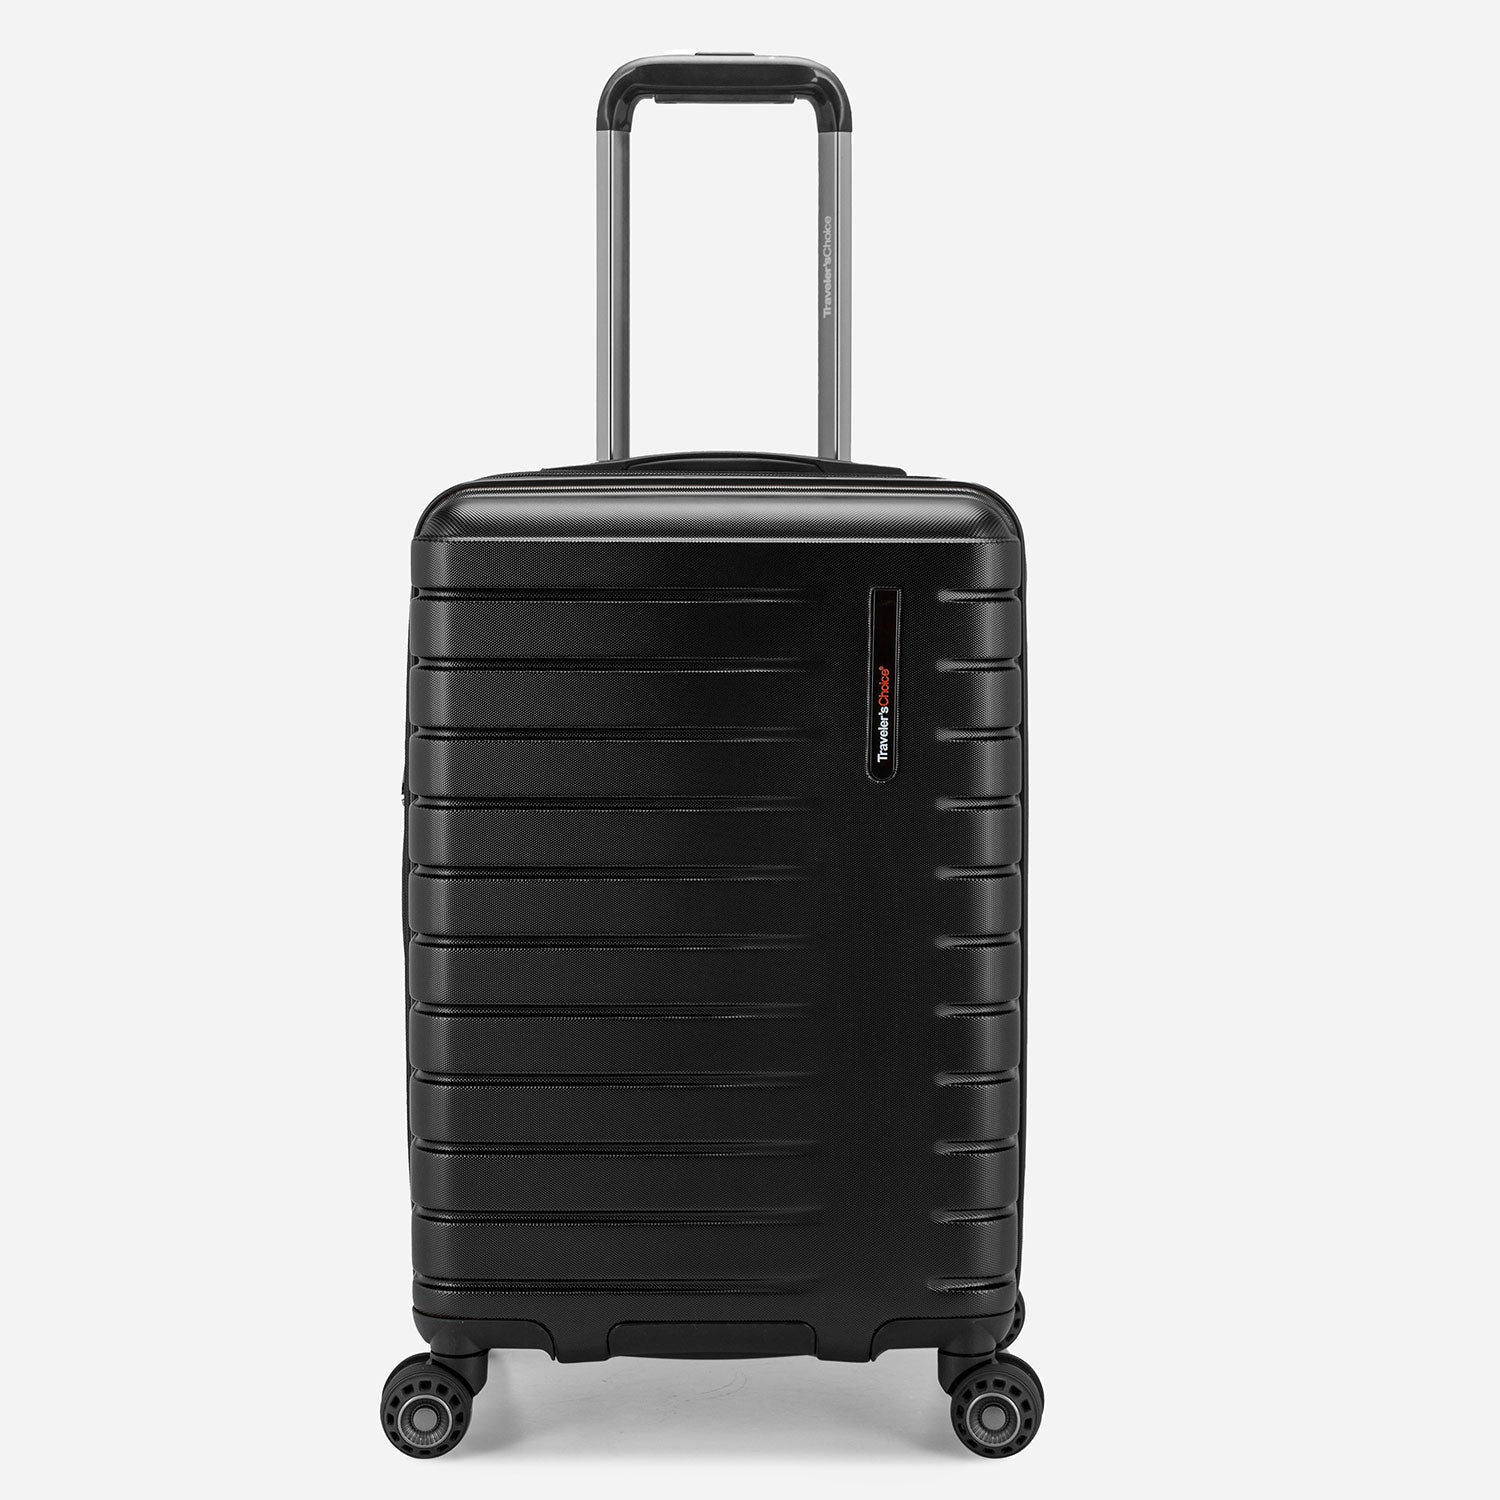 Customize Your Trip: Carry-On, Checked & Sets Luggage | Samsonite